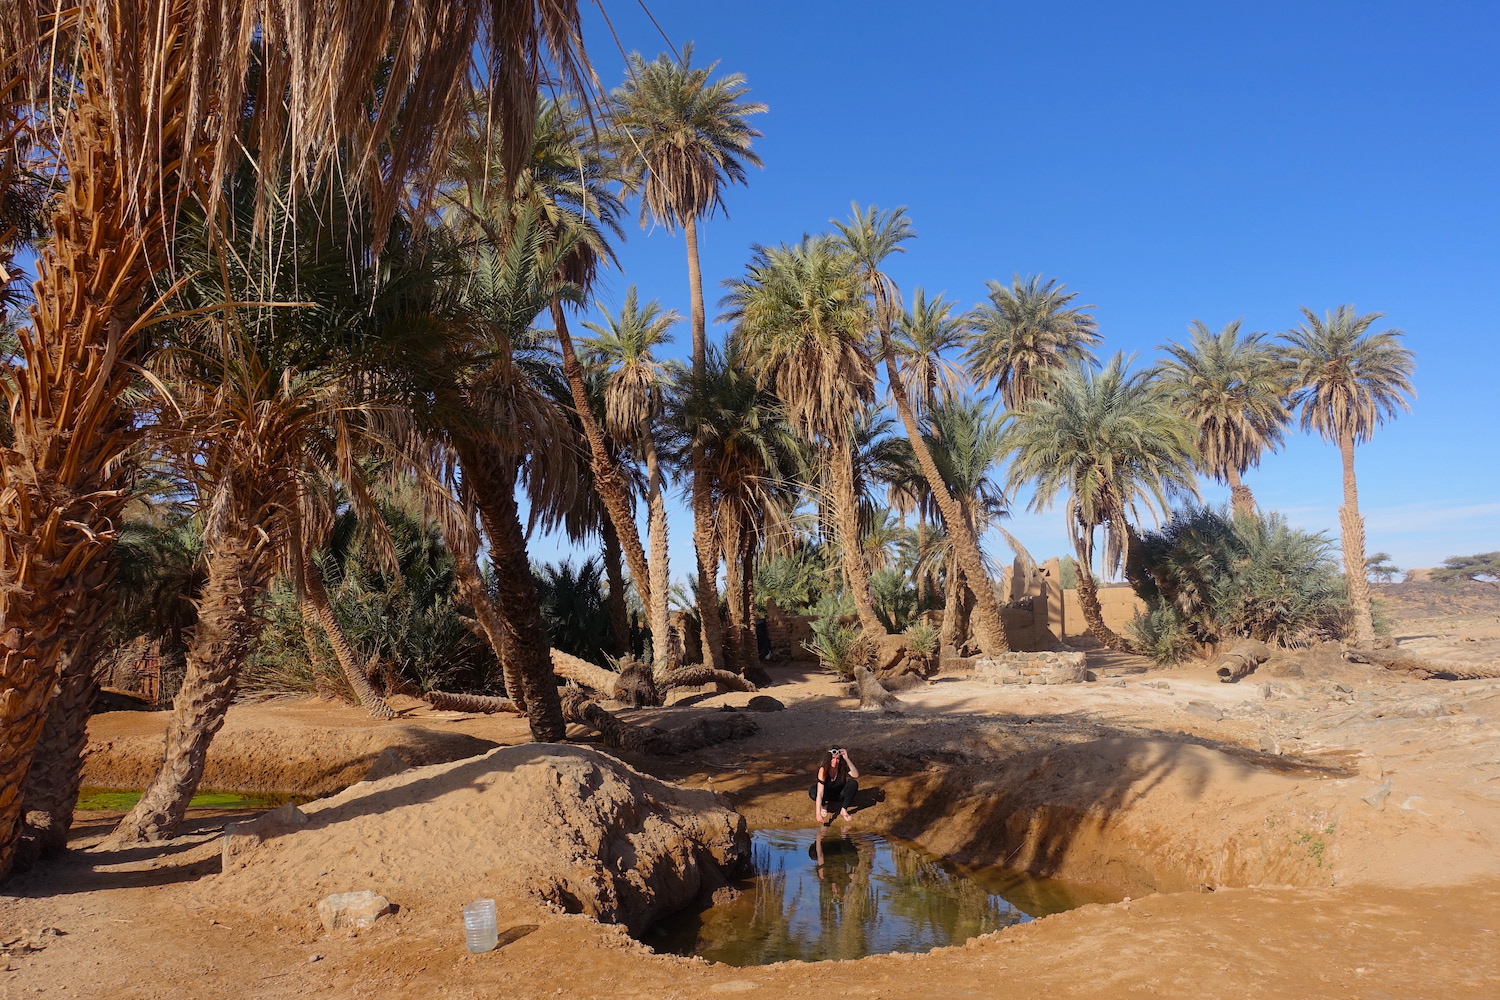 At the oasis well on the way to Erg Chigaga